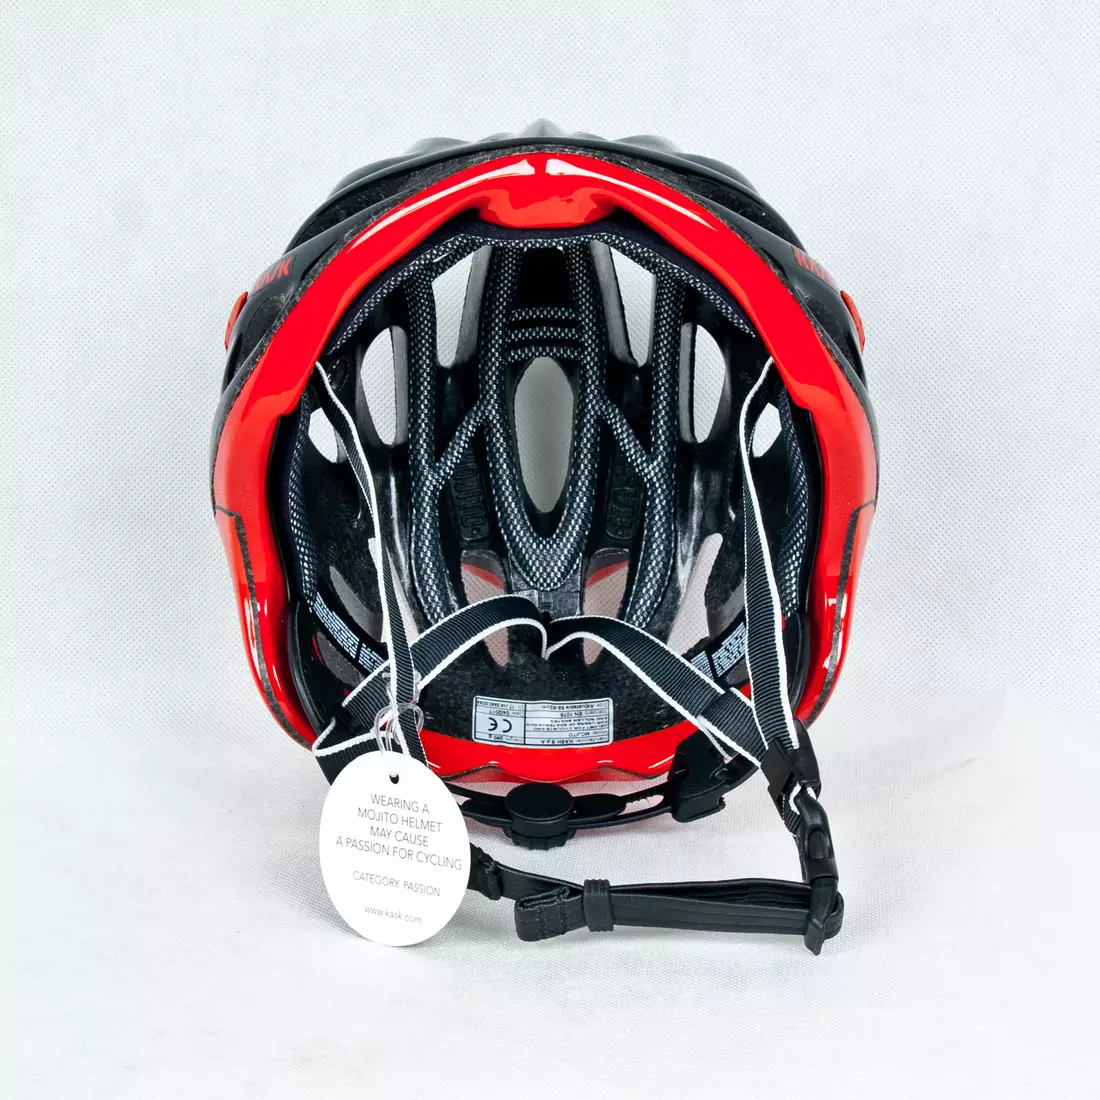 MOJITO HELMET - bicycle helmet CHE00044.226 color: black and red